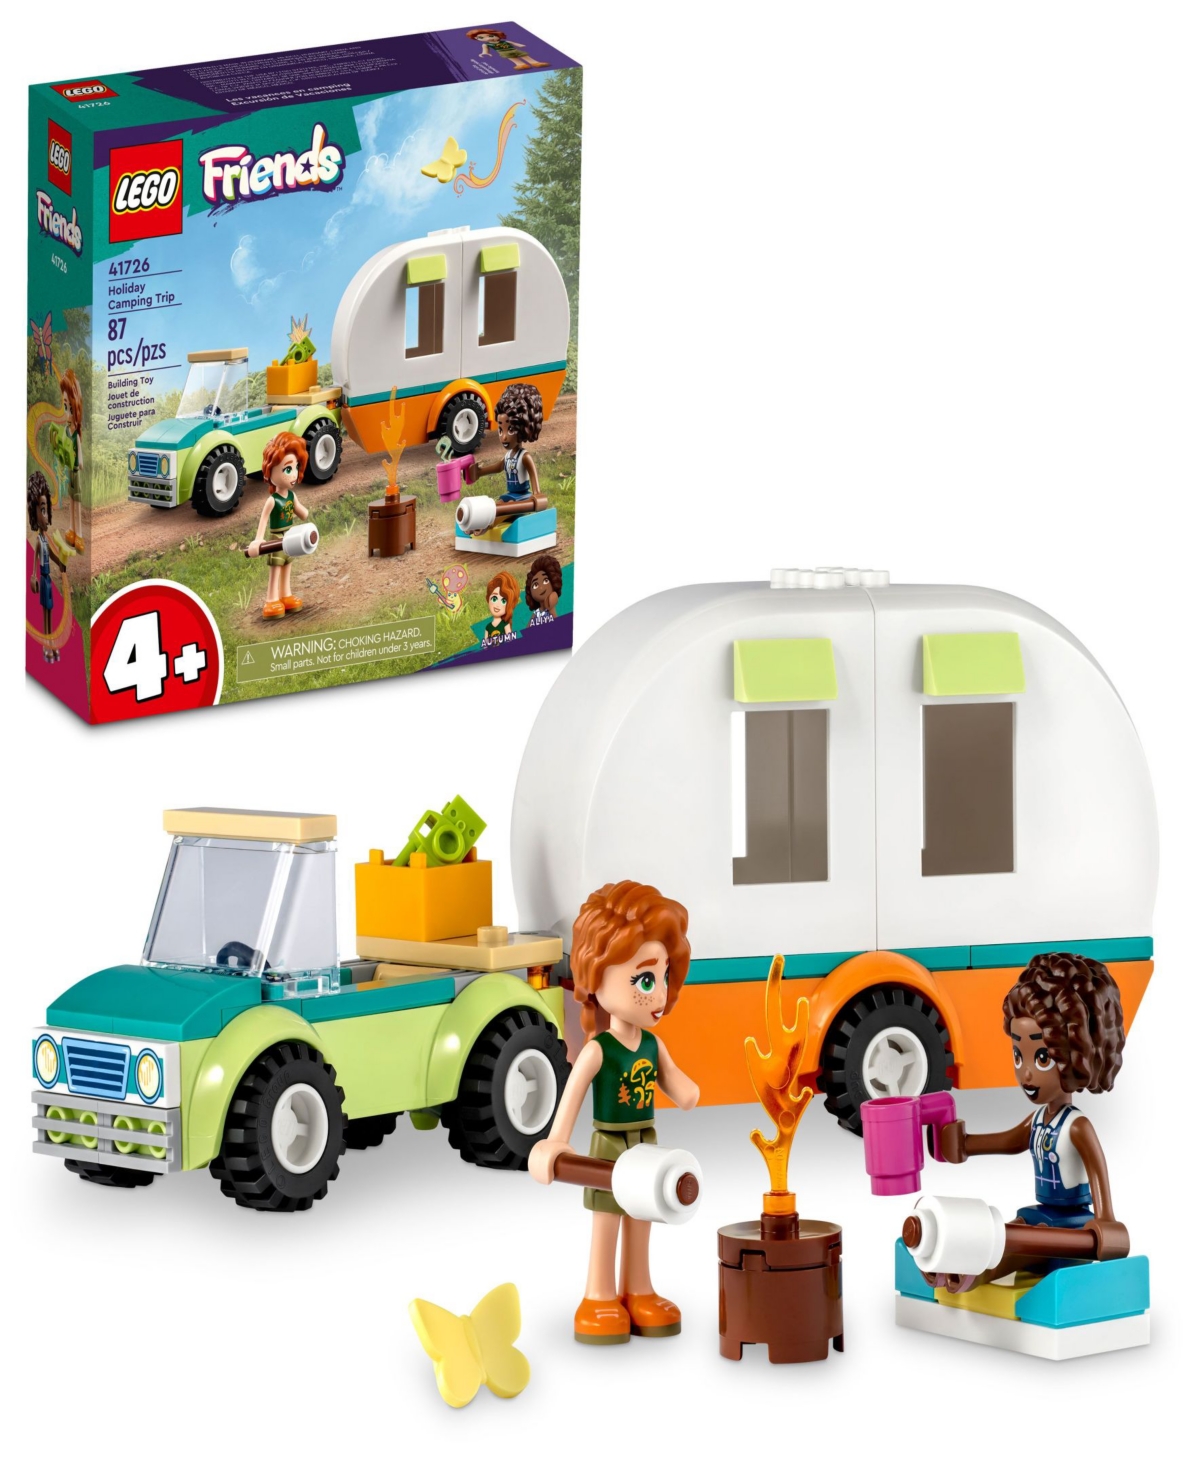 Lego Friends Holiday Camping Trip 41726 Building Set, 87 Pieces In Multicolor